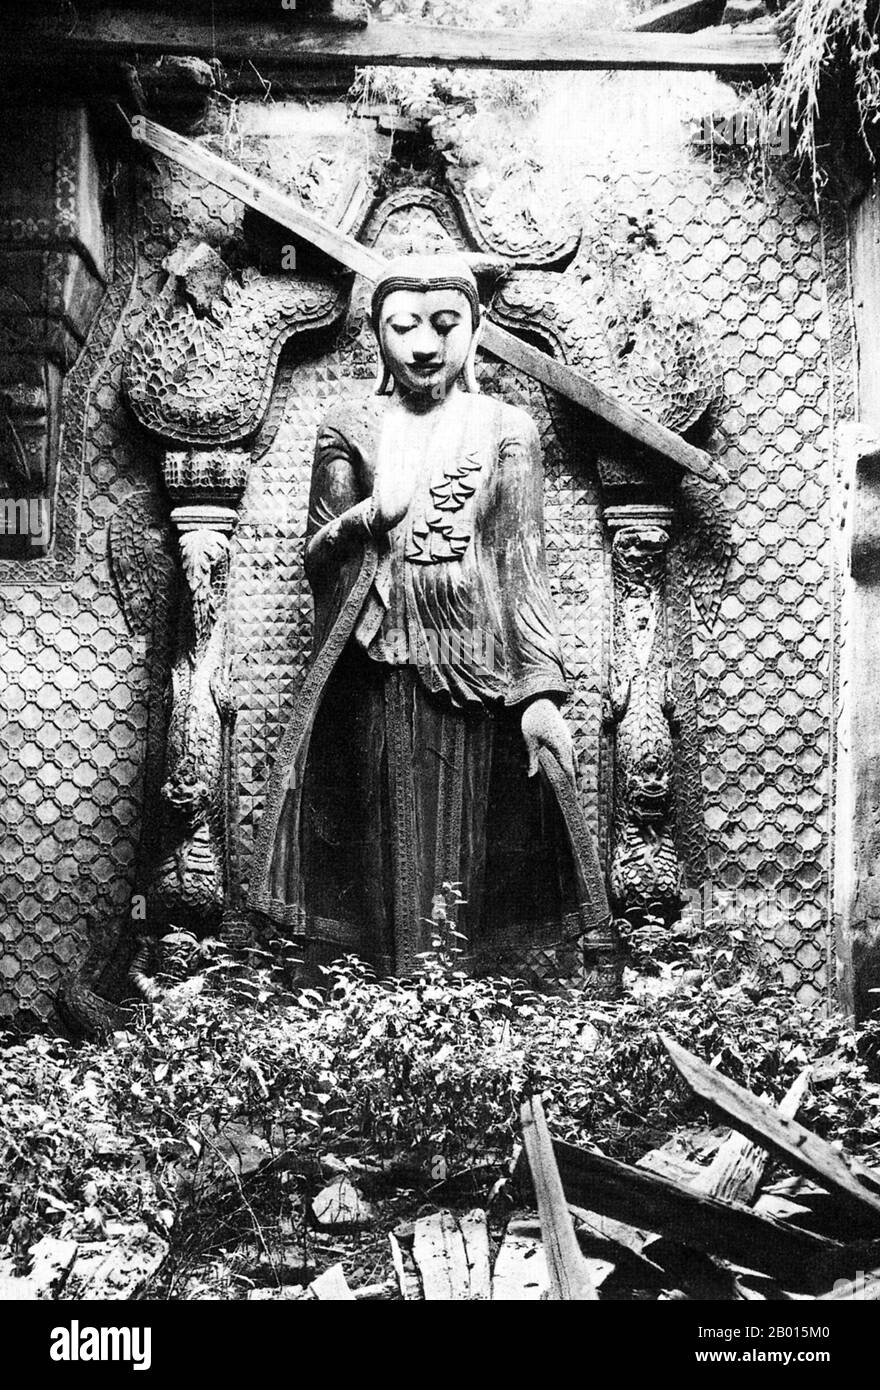 Burma/Myanmar: A beautiful Buddha statue remains standing in a ruined temple in Amarapura, central Burma, c. 1920s.  Pali for 'The City of Immortality', Amarapura was the capital of Burma for three periods during the Konbaung dynasty in the 18th and 19th centuries before finally being supplanted by Mandalay, just 11km north, in 1857.  King Bodawpaya (1781–1819) of the Konbaung Dynasty founded Amarapura as his new capital in 1783, soon after he ascended the throne. In 1795, he received the first British embassy to Burma from the British East India Company led by Michael Symes. Stock Photo